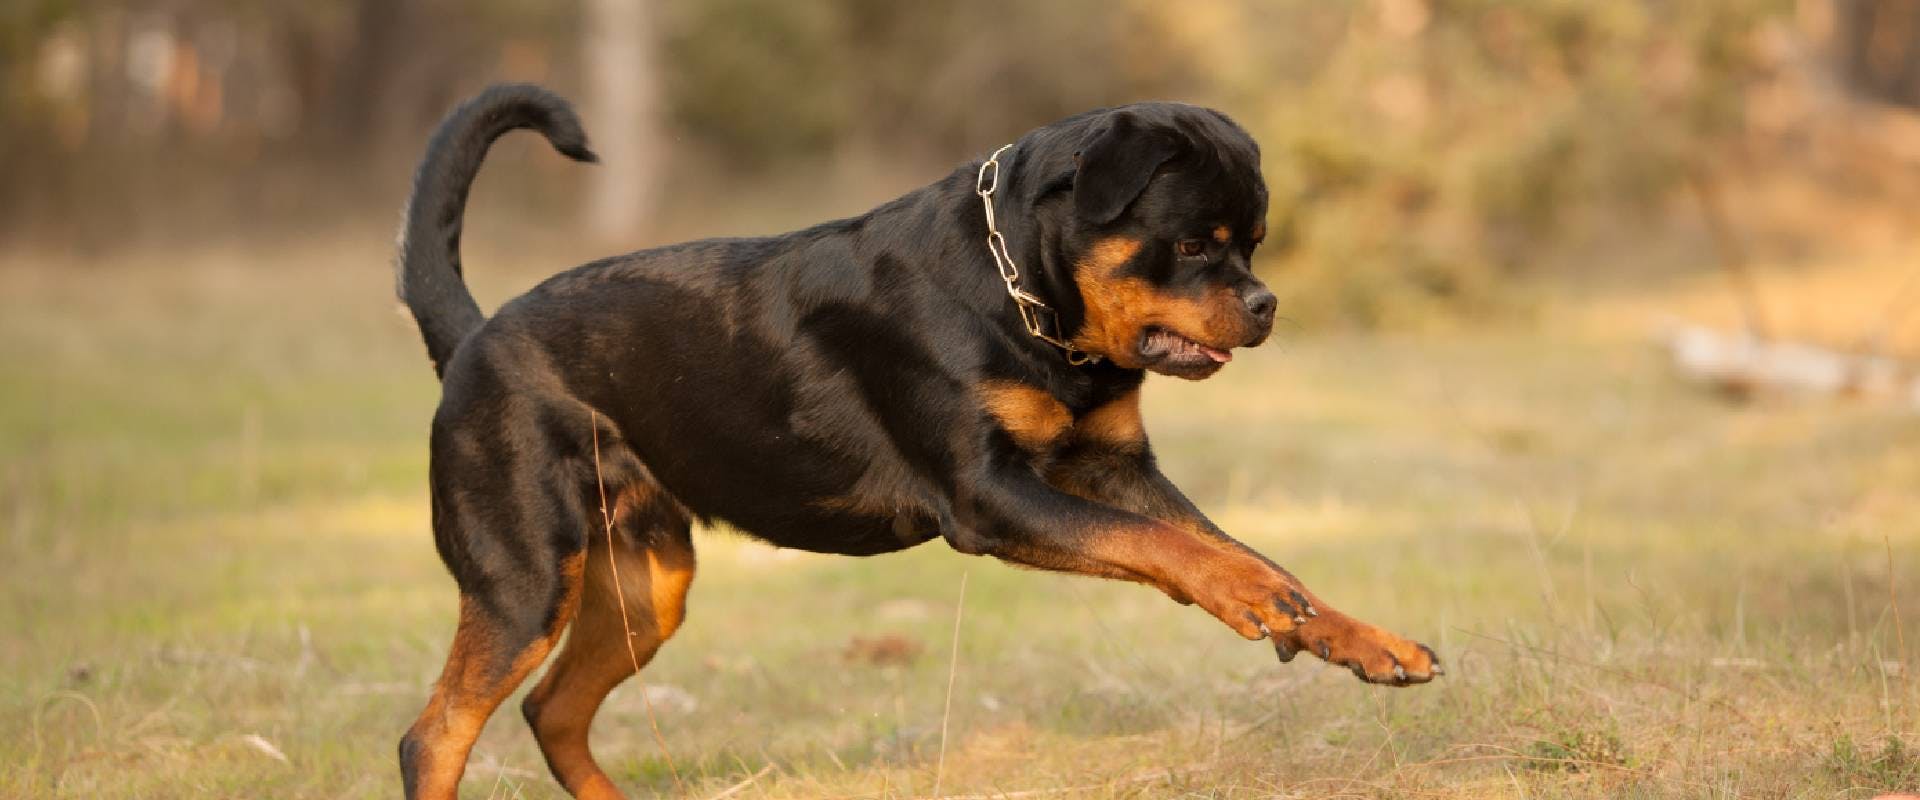 how much space does a rottweiler need? 2